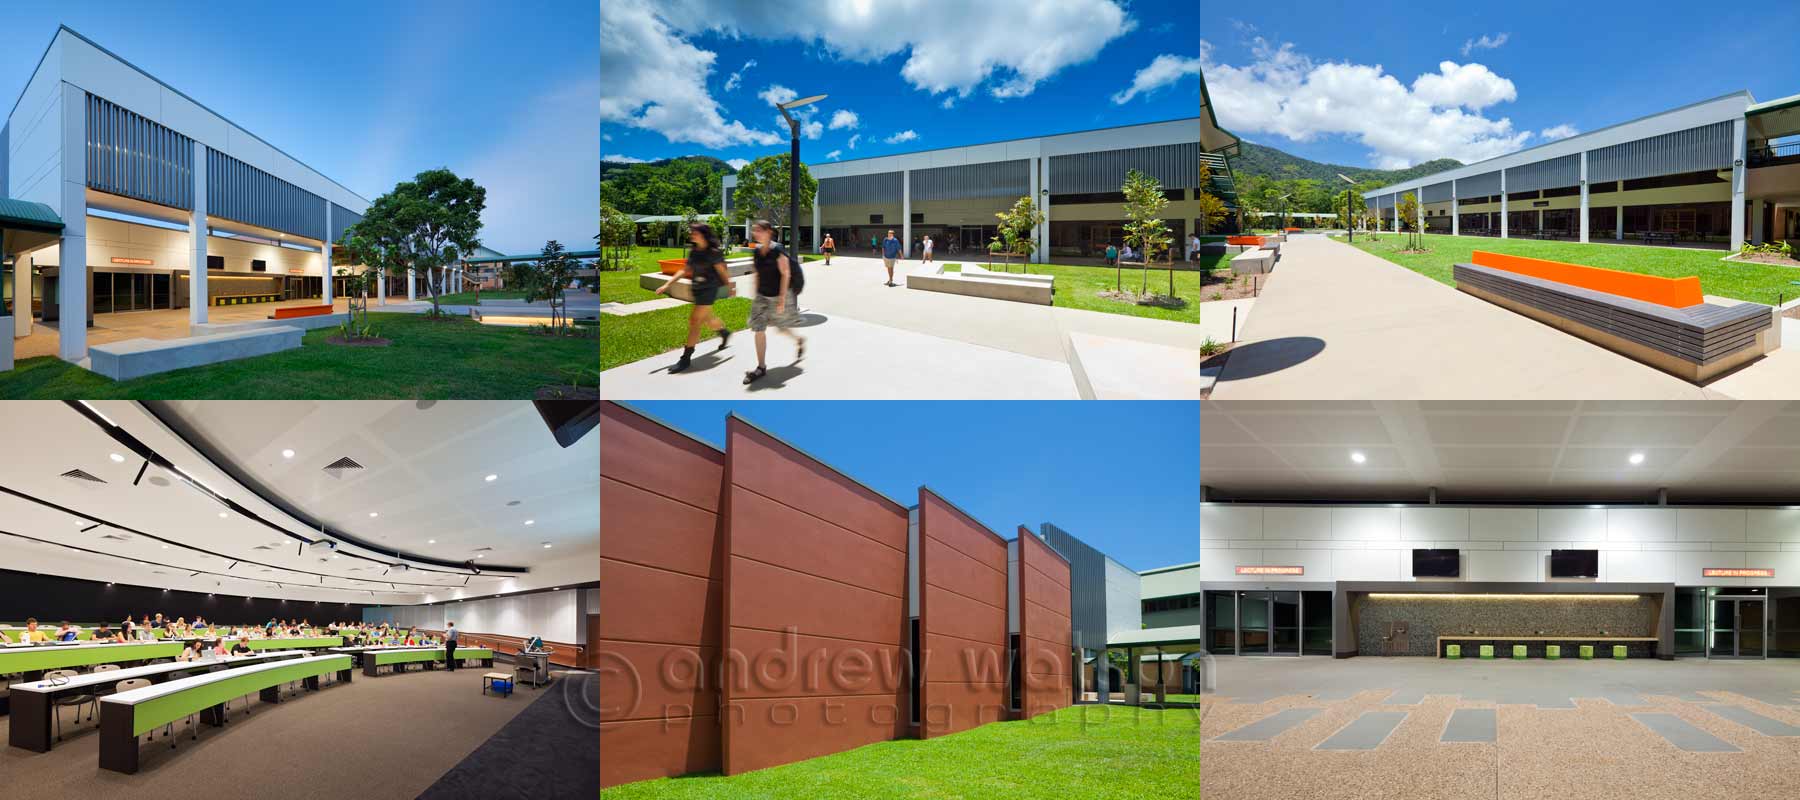 Architecture photography - Crowther Lecture Theatre and Founders Green, James Cook University, Cairns